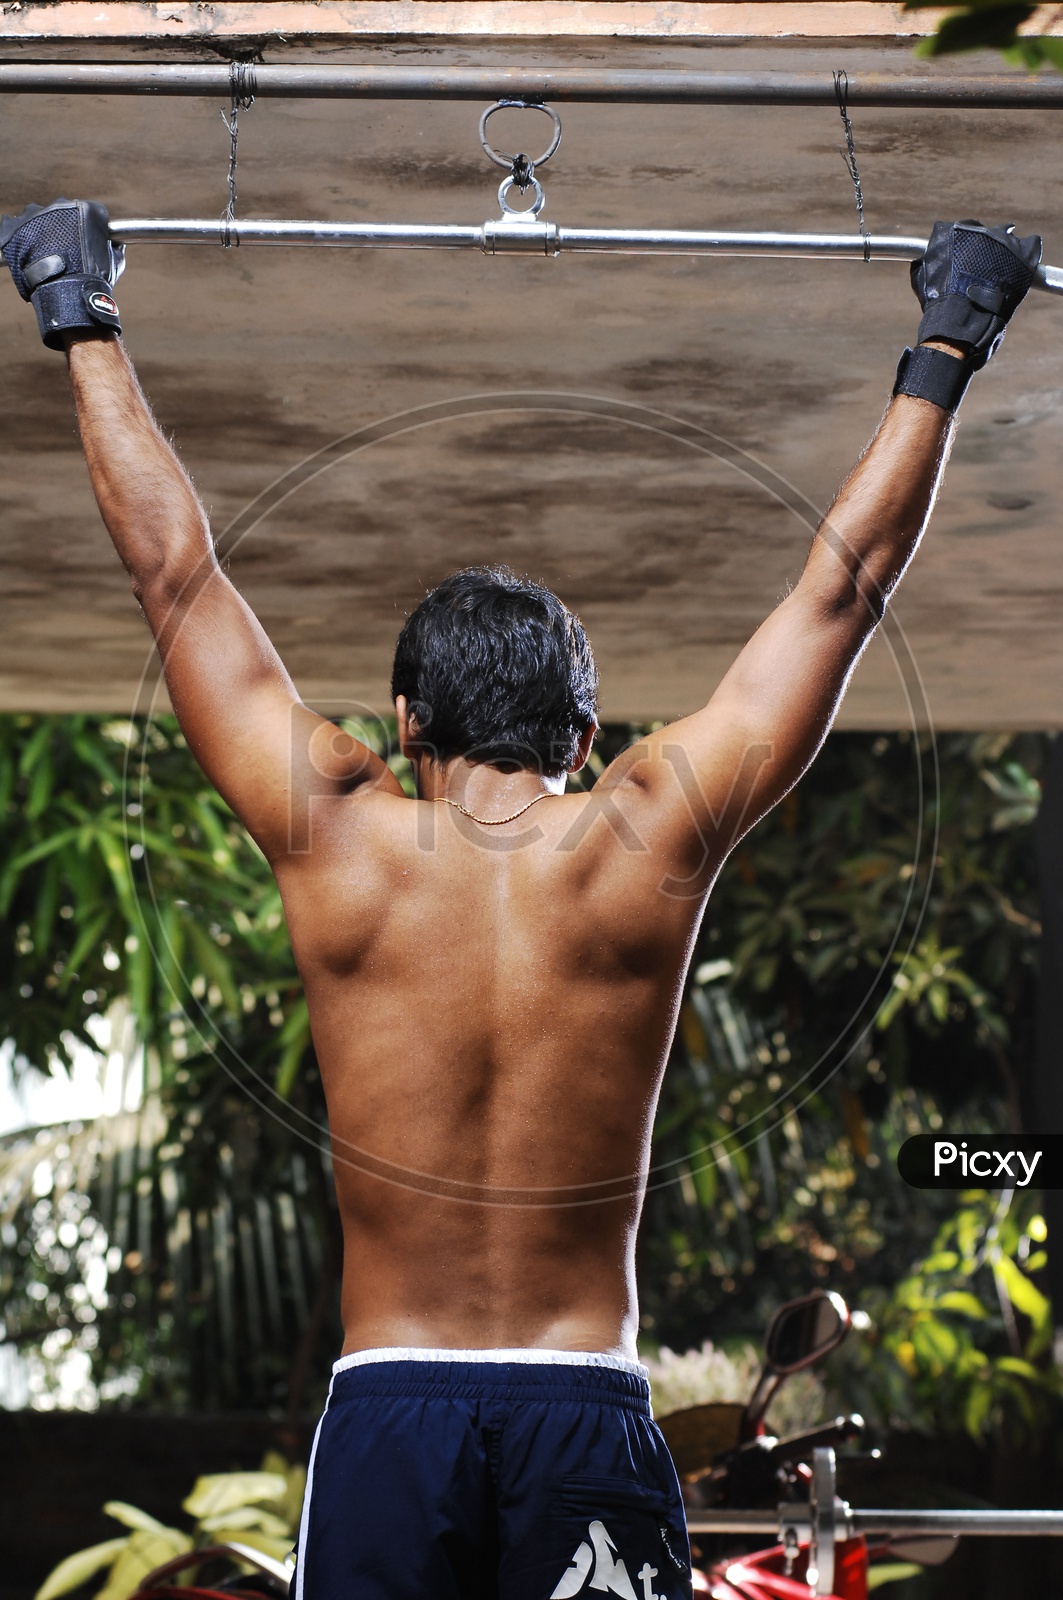 Young Indian Man with Six Pack doing Exercise